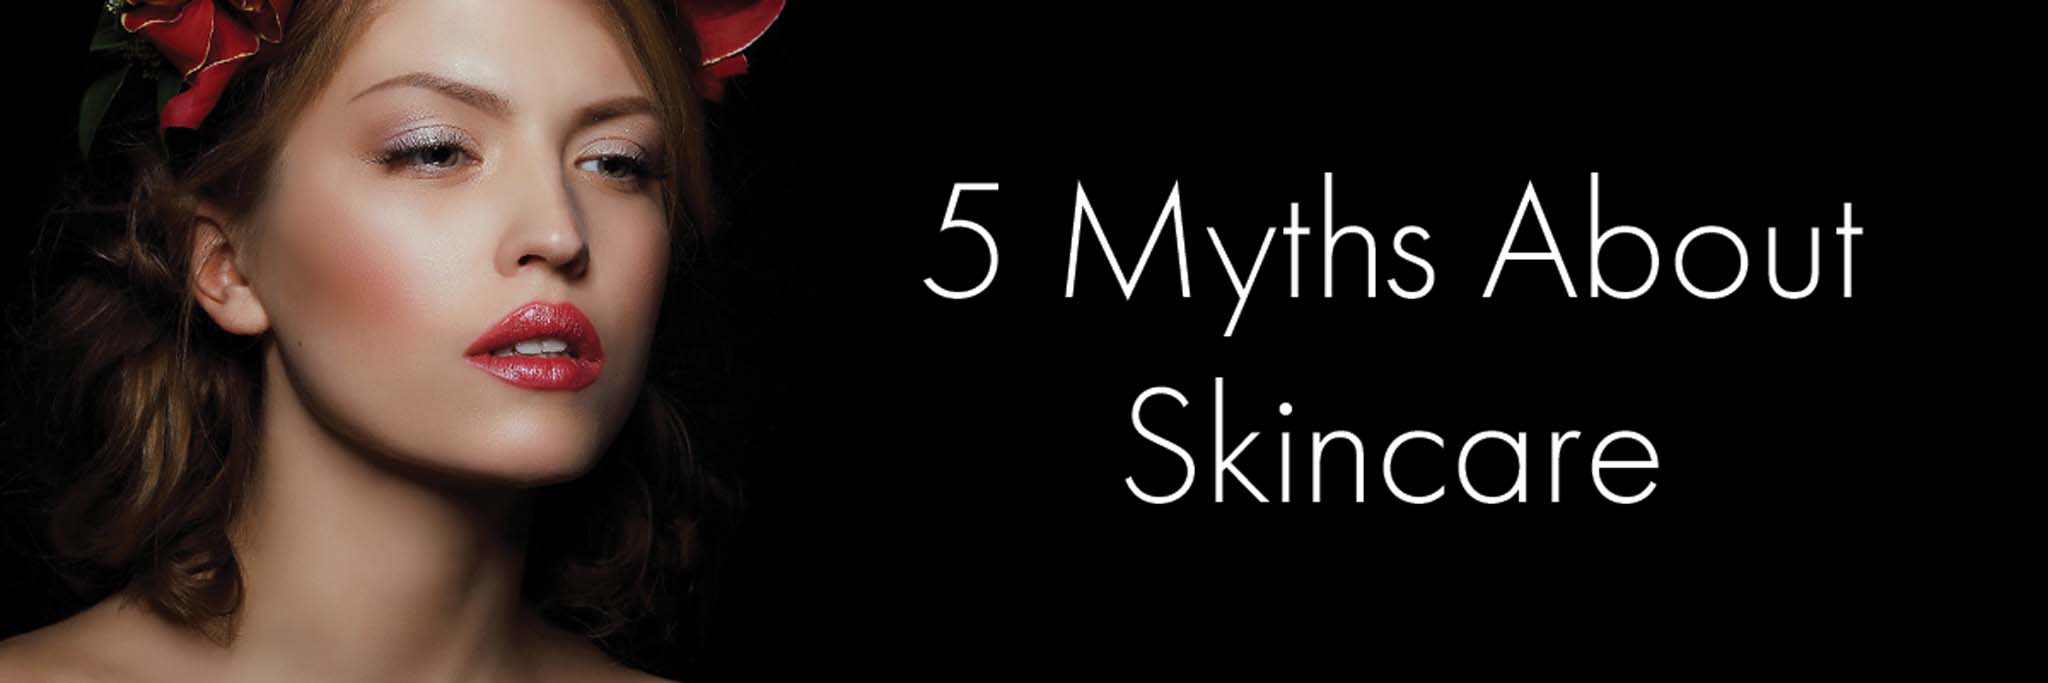 5 myths about skincare